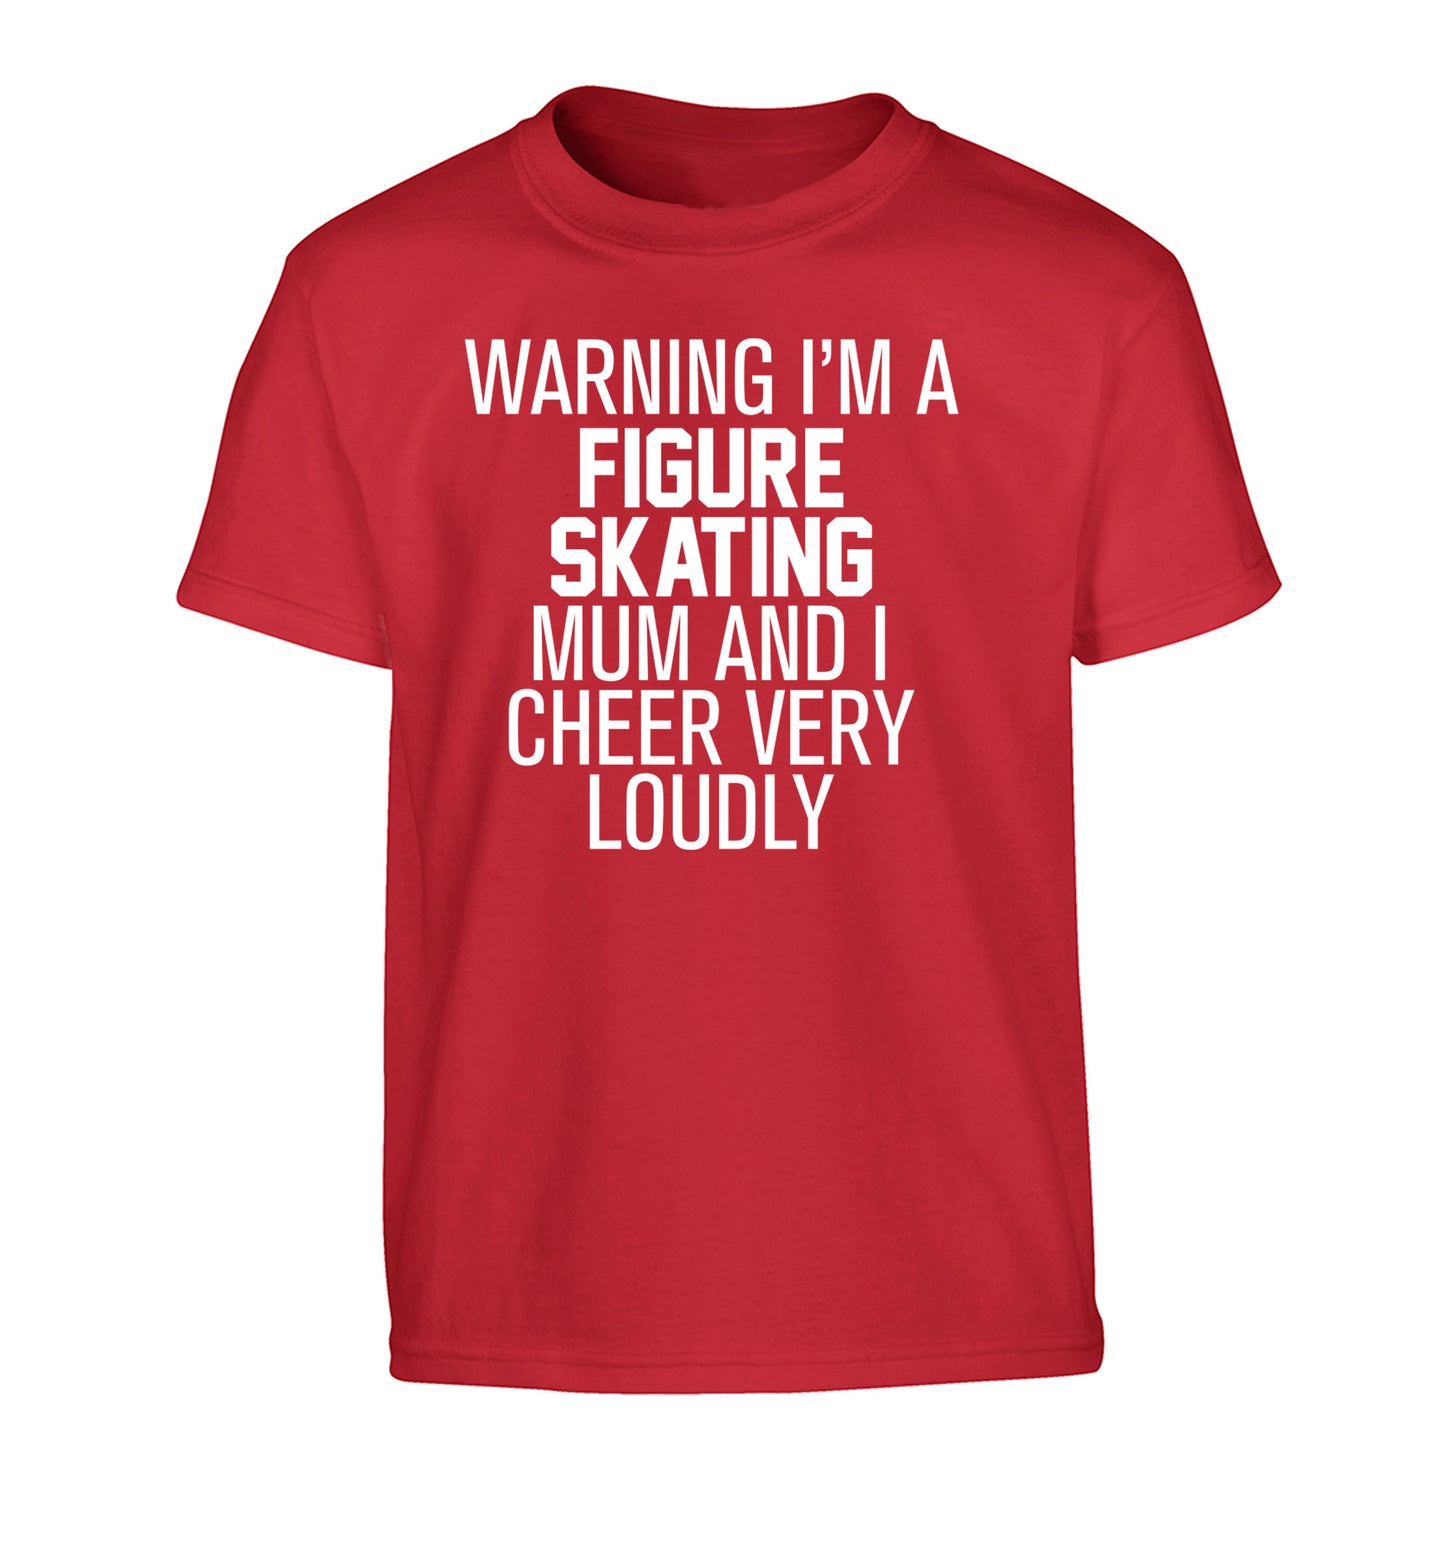 Warning I'm a figure skating mum and I cheer very loudly Children's red Tshirt 12-14 Years